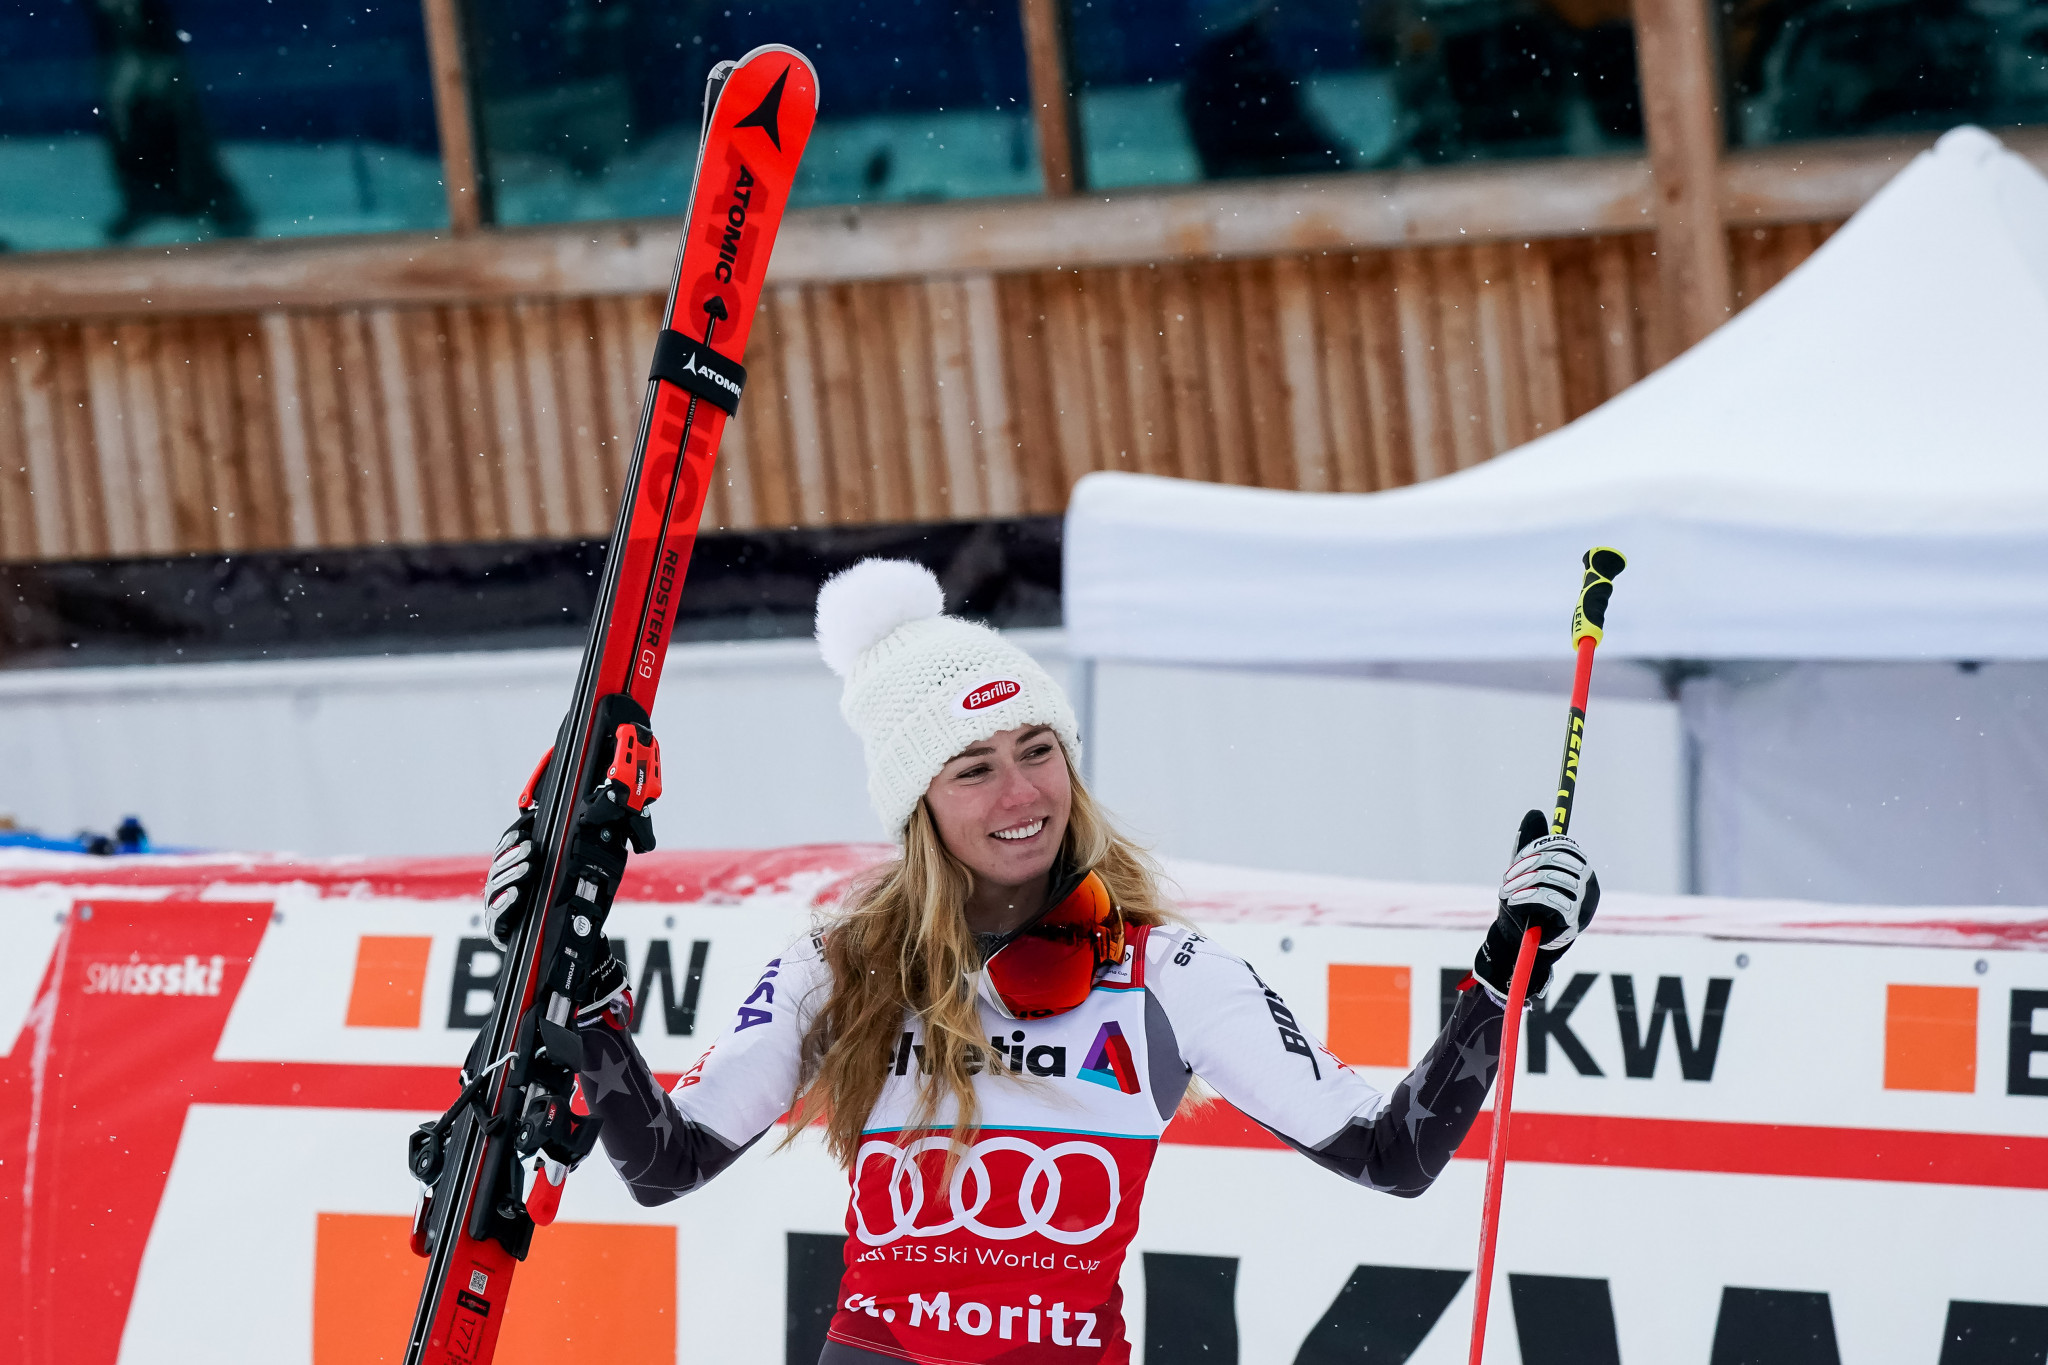 Shiffrin wins again in St Mortiz as men's event in Val d'Isere cancelled